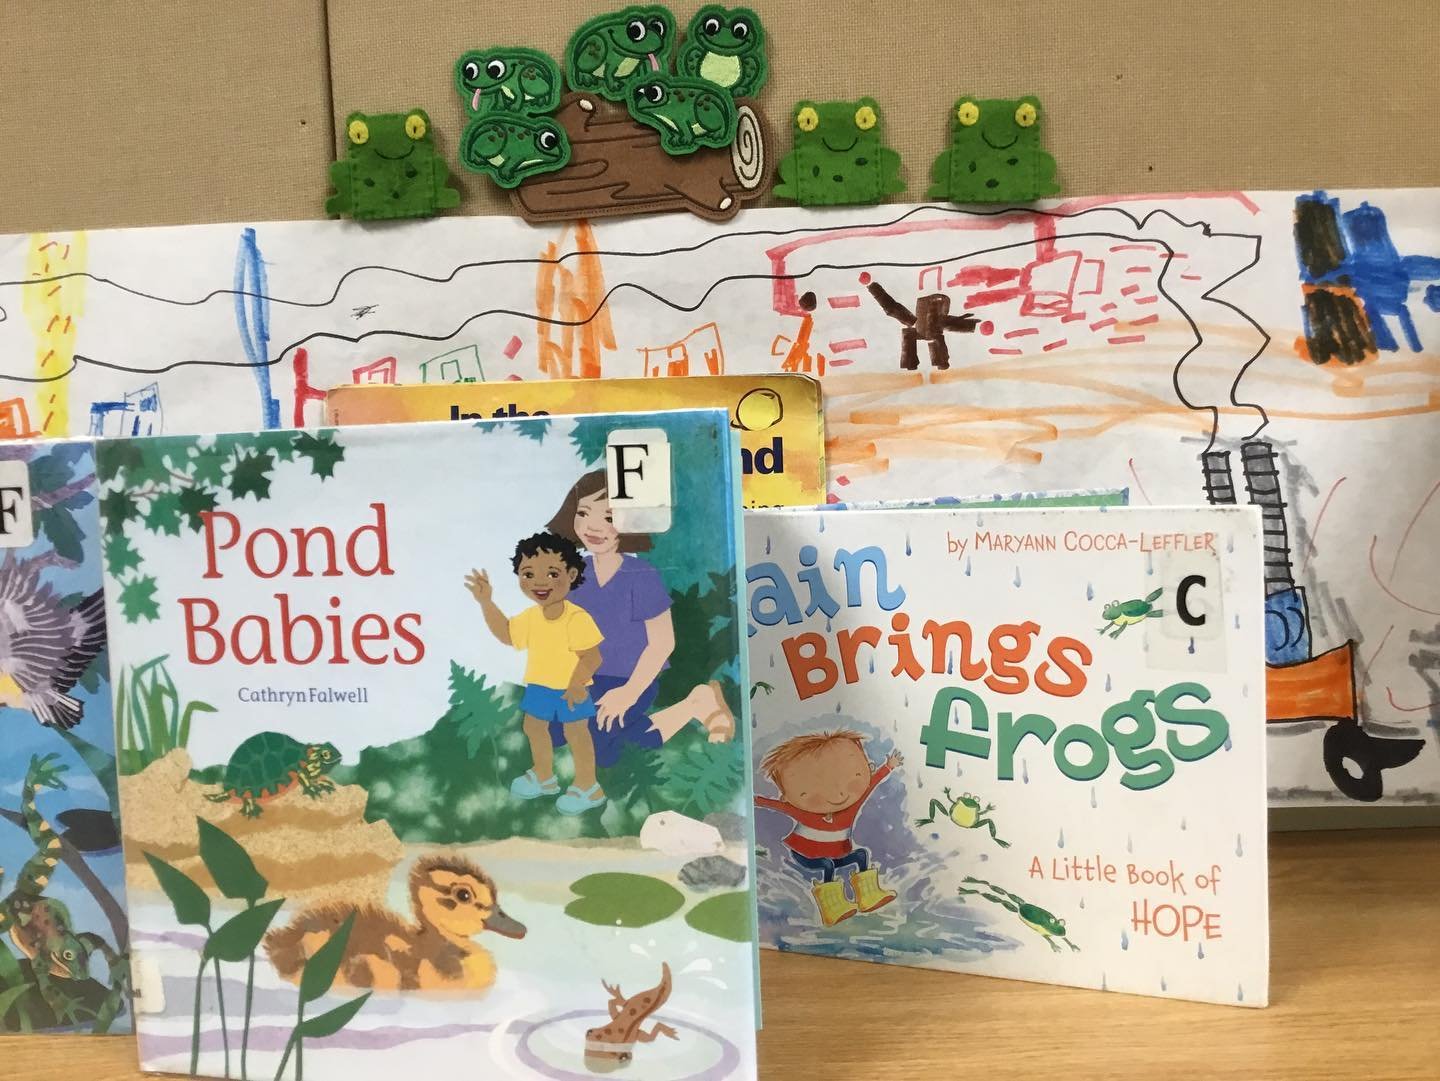 We are all set for our May Saturday Storytime tomorrow morning at 10:00, where we&rsquo;ll enjoy stories, songs, and rhymes about Spring pond life and frogs!